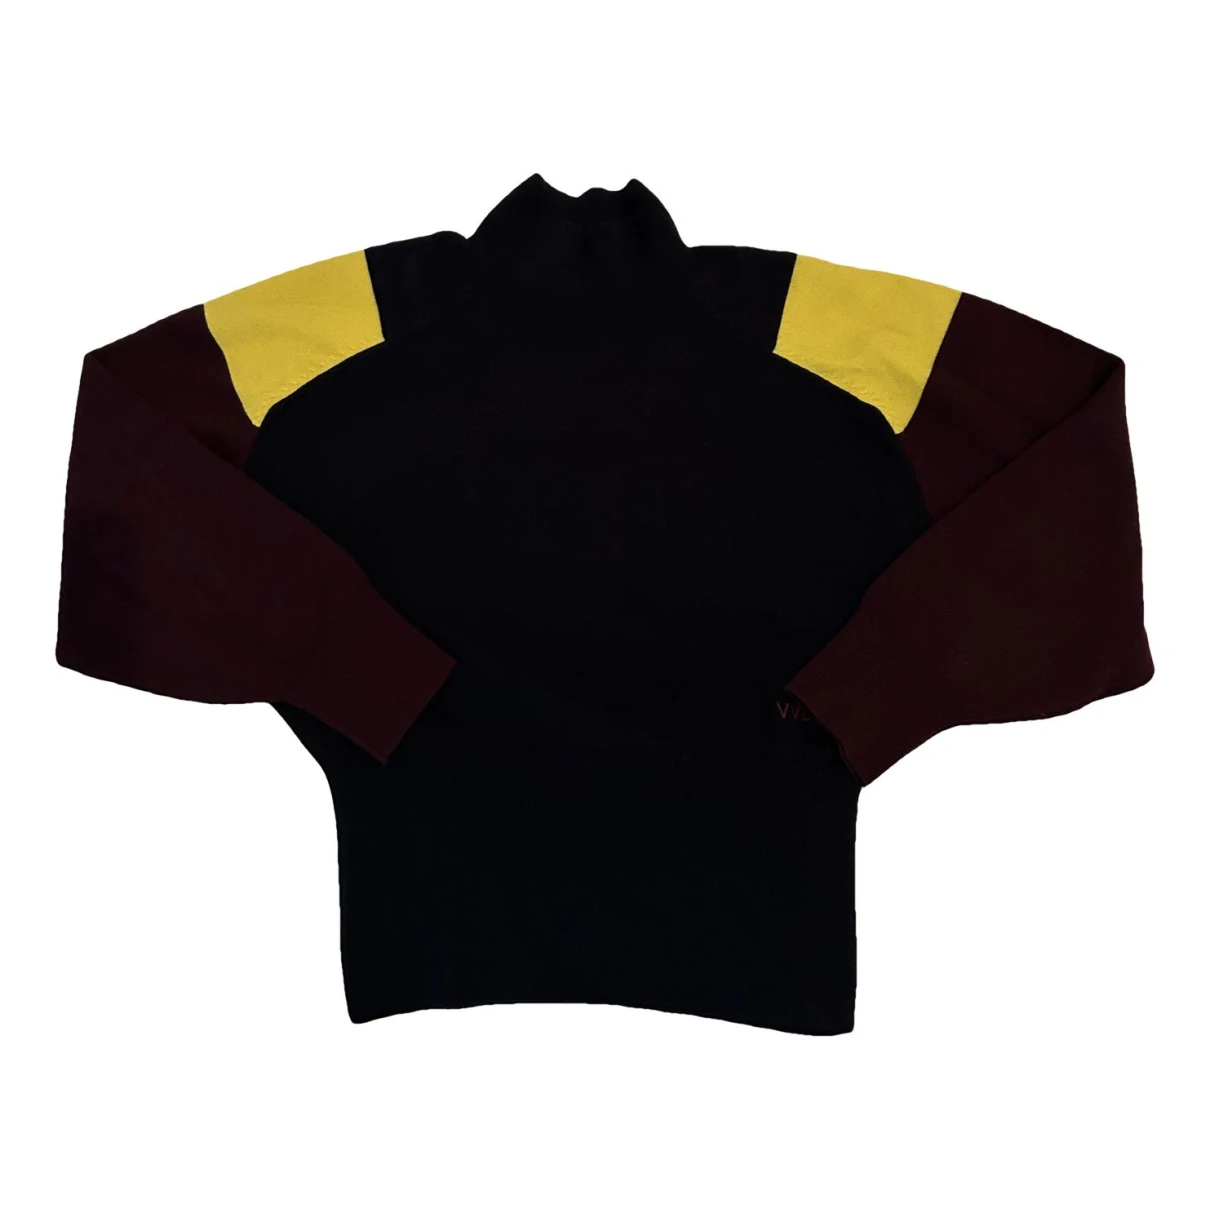 Pre-owned Victoria Beckham Wool Jumper In Multicolour